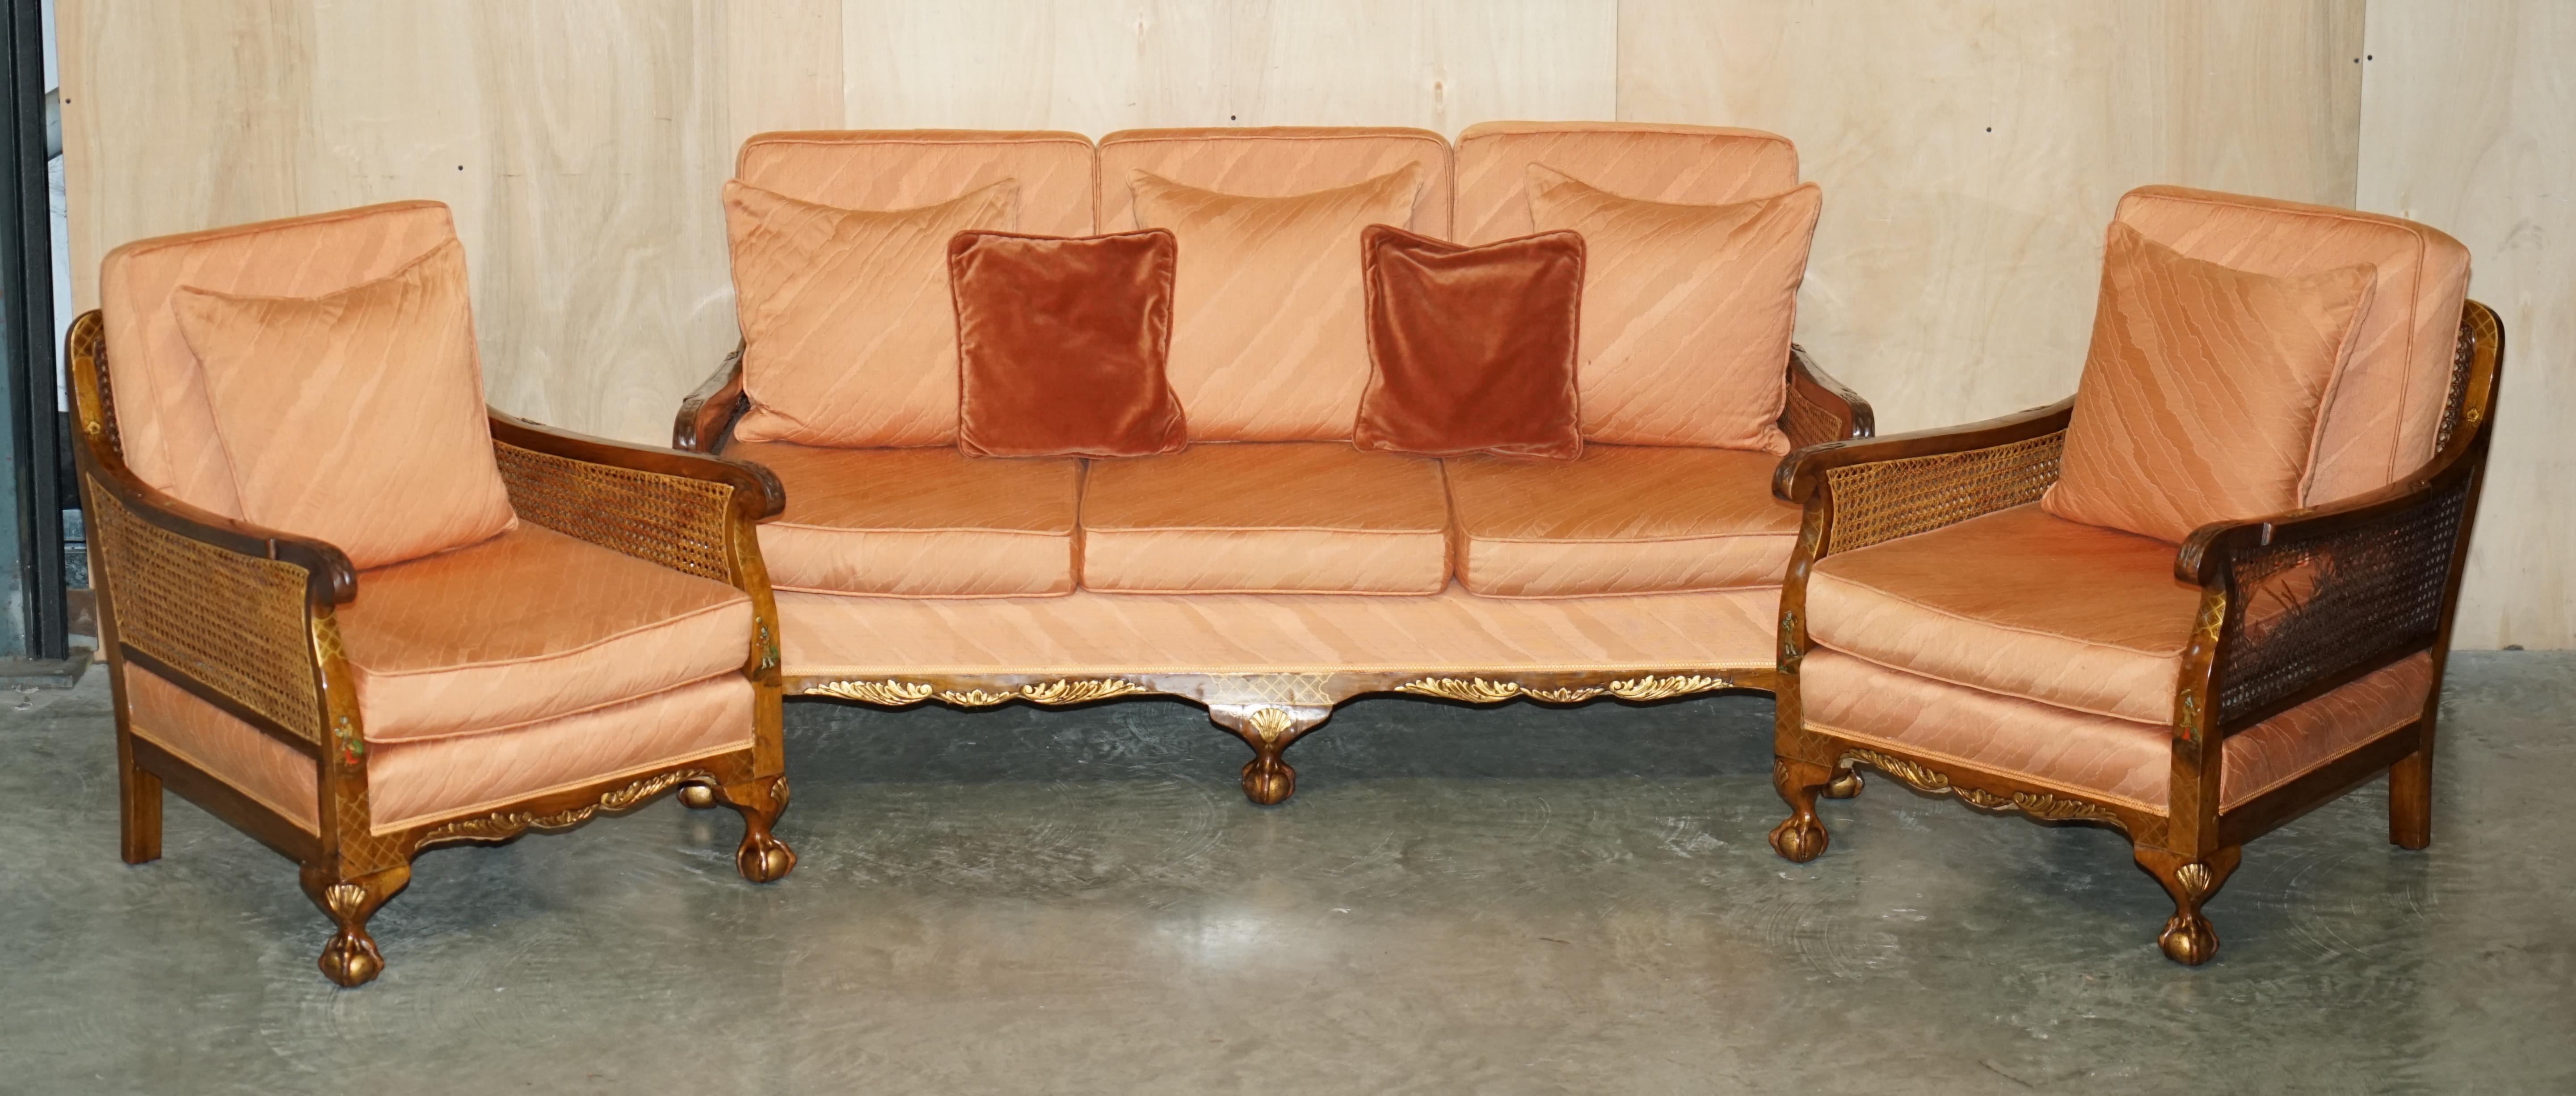 Royal House Antiques

Royal House Antiques is delighted to offer for sale this stunning original Chinese Export Circa 1920's Chinoiserie Bergere suite with hand painted and lacquered frames

Please note the delivery fee listed is just a guide, it